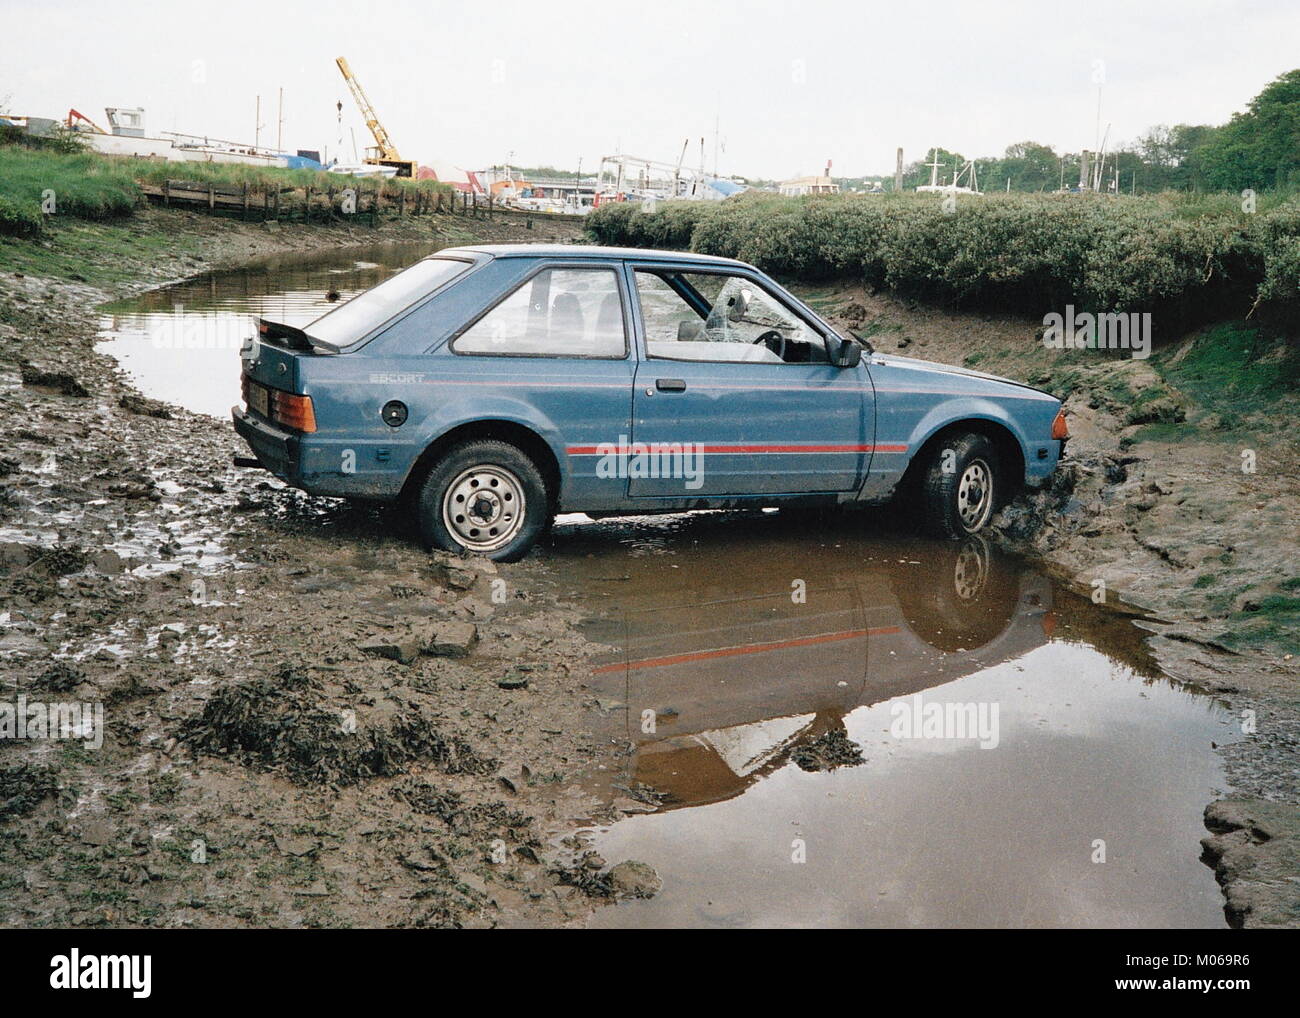 AJAXNETPHOTO. 1991.HAMBLE, ENGLAND. - UP THE CREEK. - A FORD ESCORT LIES IN A TIDAL RIVER CREEK AFTER COMING OFF THE ROAD.  PHOTO:JONATHAN EASTLAND/AJAX REF:TC6053 11 7 Stock Photo